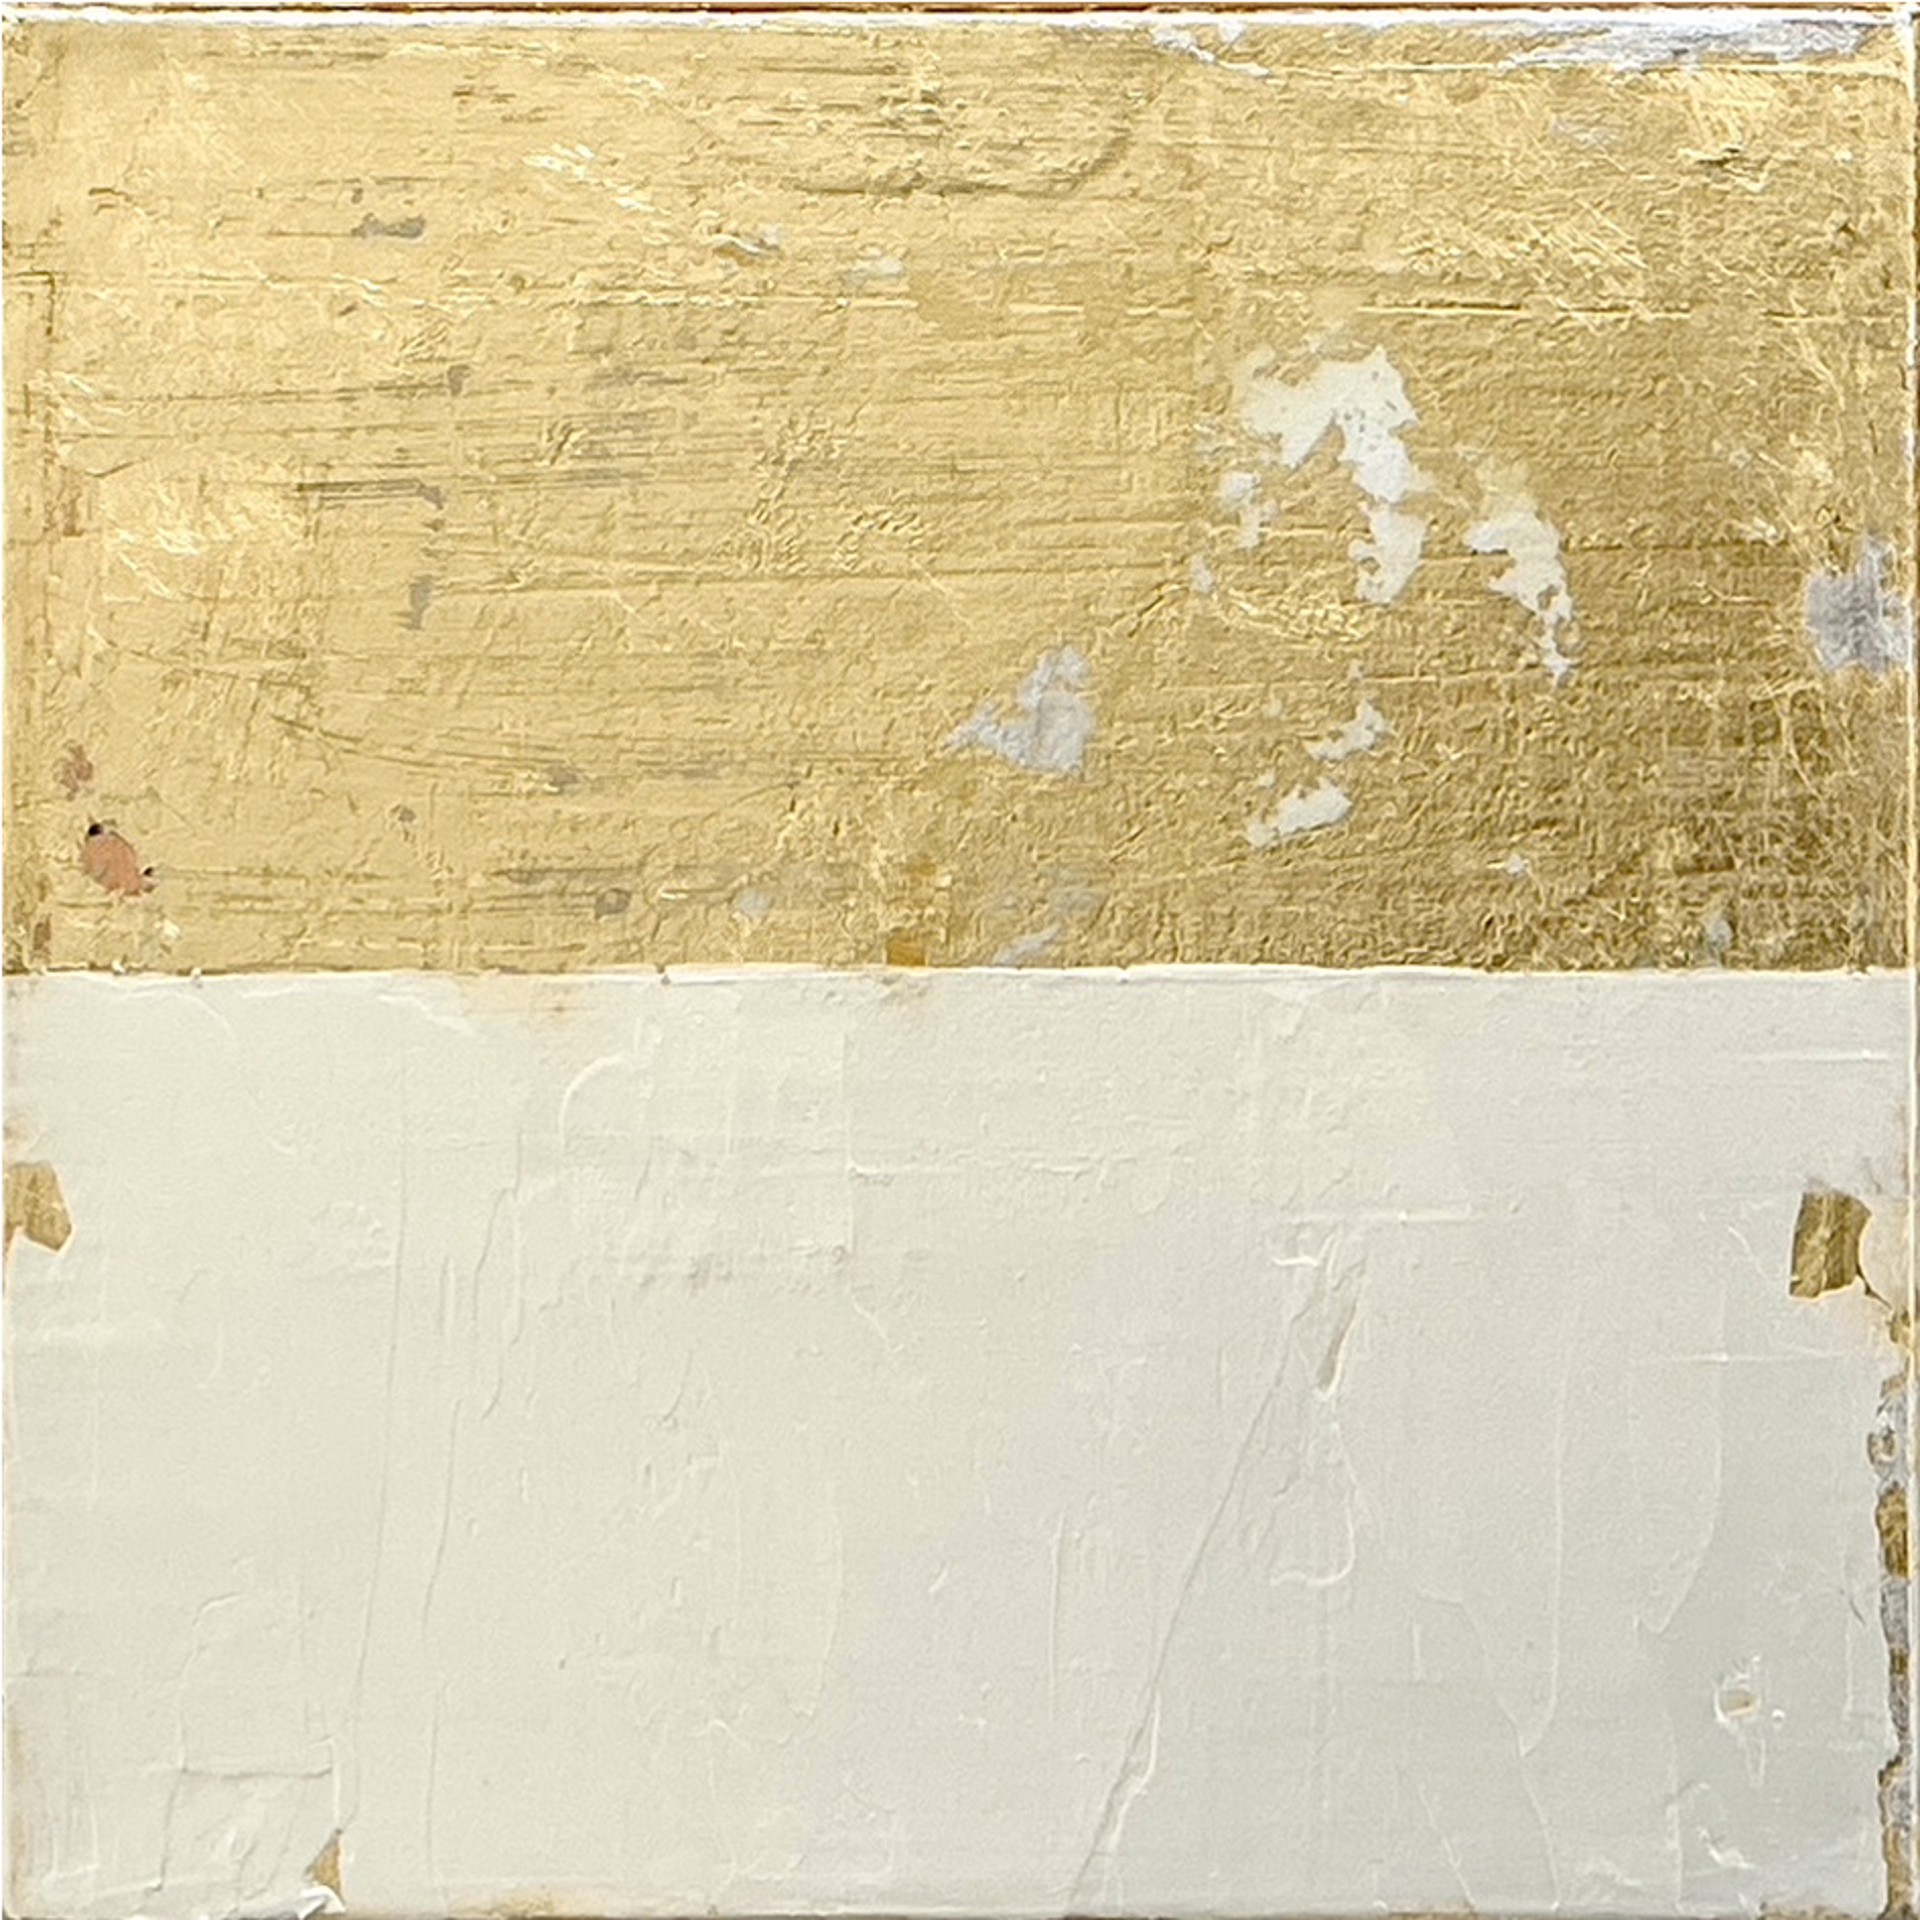 Gold And Gold (GG052) is 1 of 4 gold leaf mixed media panels from Japanese painter and artist Takefumi Hori.